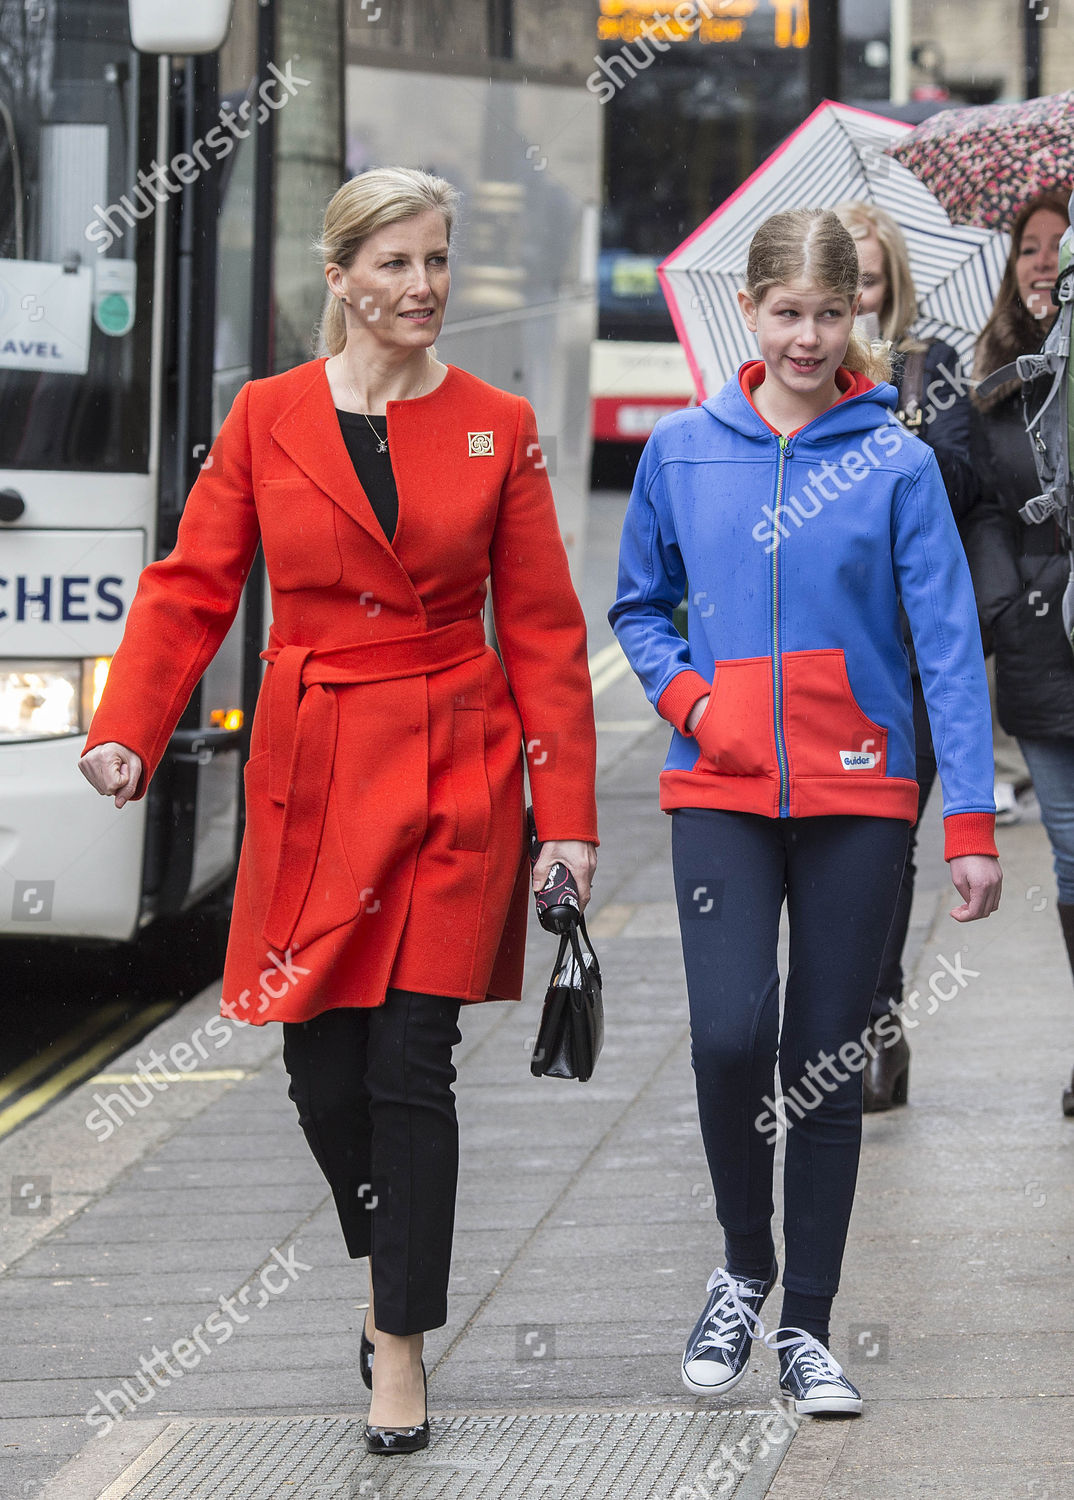 countess-of-wessex-opens-the-newly-refurbished-girlguiding-headquarters-london-britain-shutterstock-editorial-5647620o.jpg